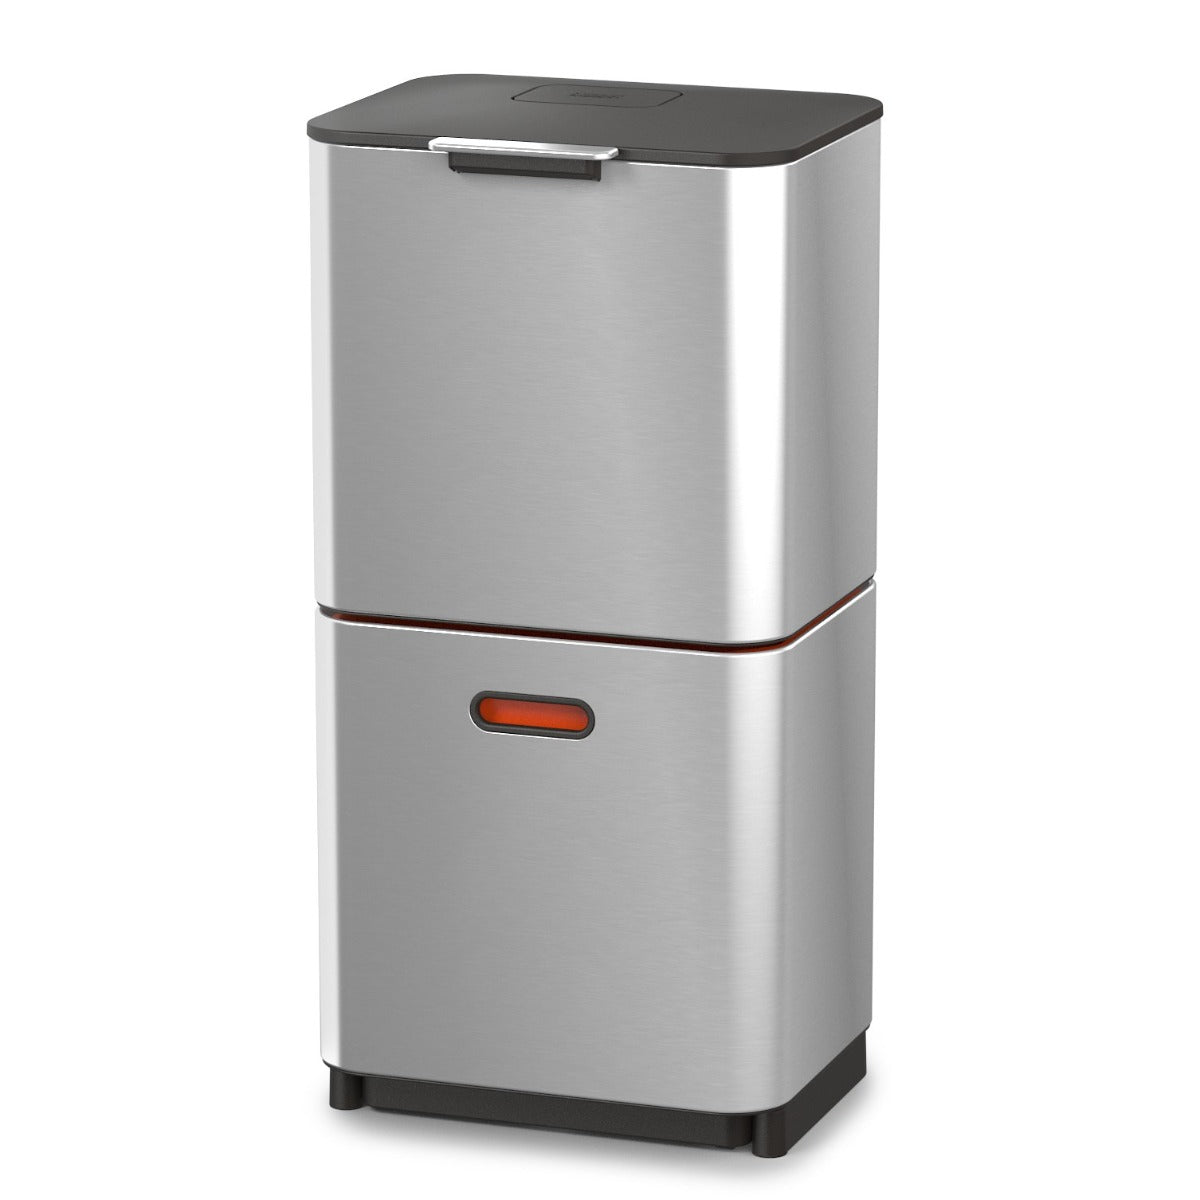 Joseph Joseph 3-Compartment Totem Max 60 Litre Kitchen Recycling Bin in Stainless Steel 30060